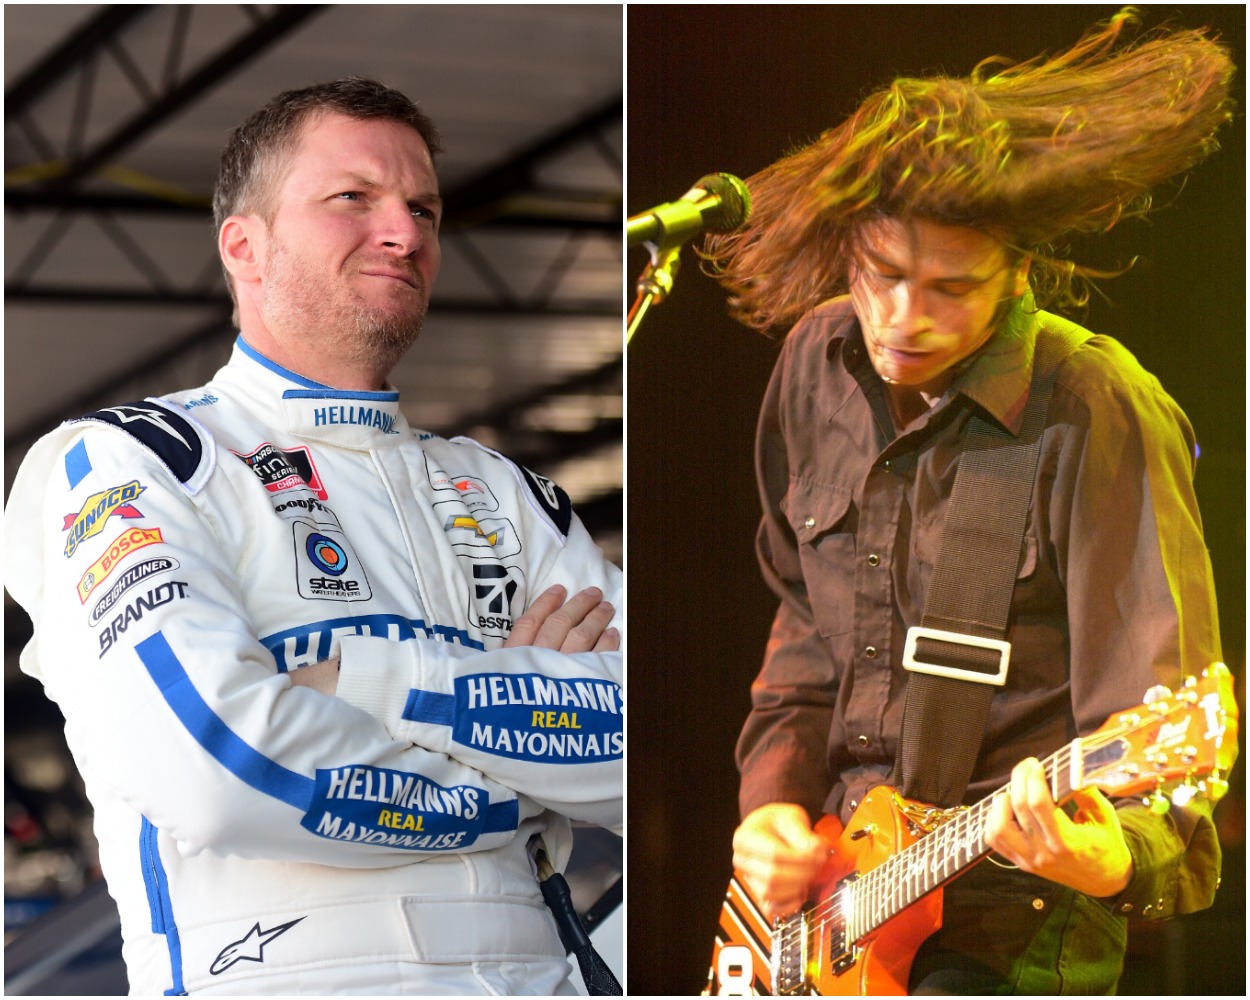 Dale Earnhardt Jr. Shares Emotional Story on Podcast About Rock Star Dave Grohl’s Moving Gesture and Tribute Just Days After Father’s Death at Daytona 500